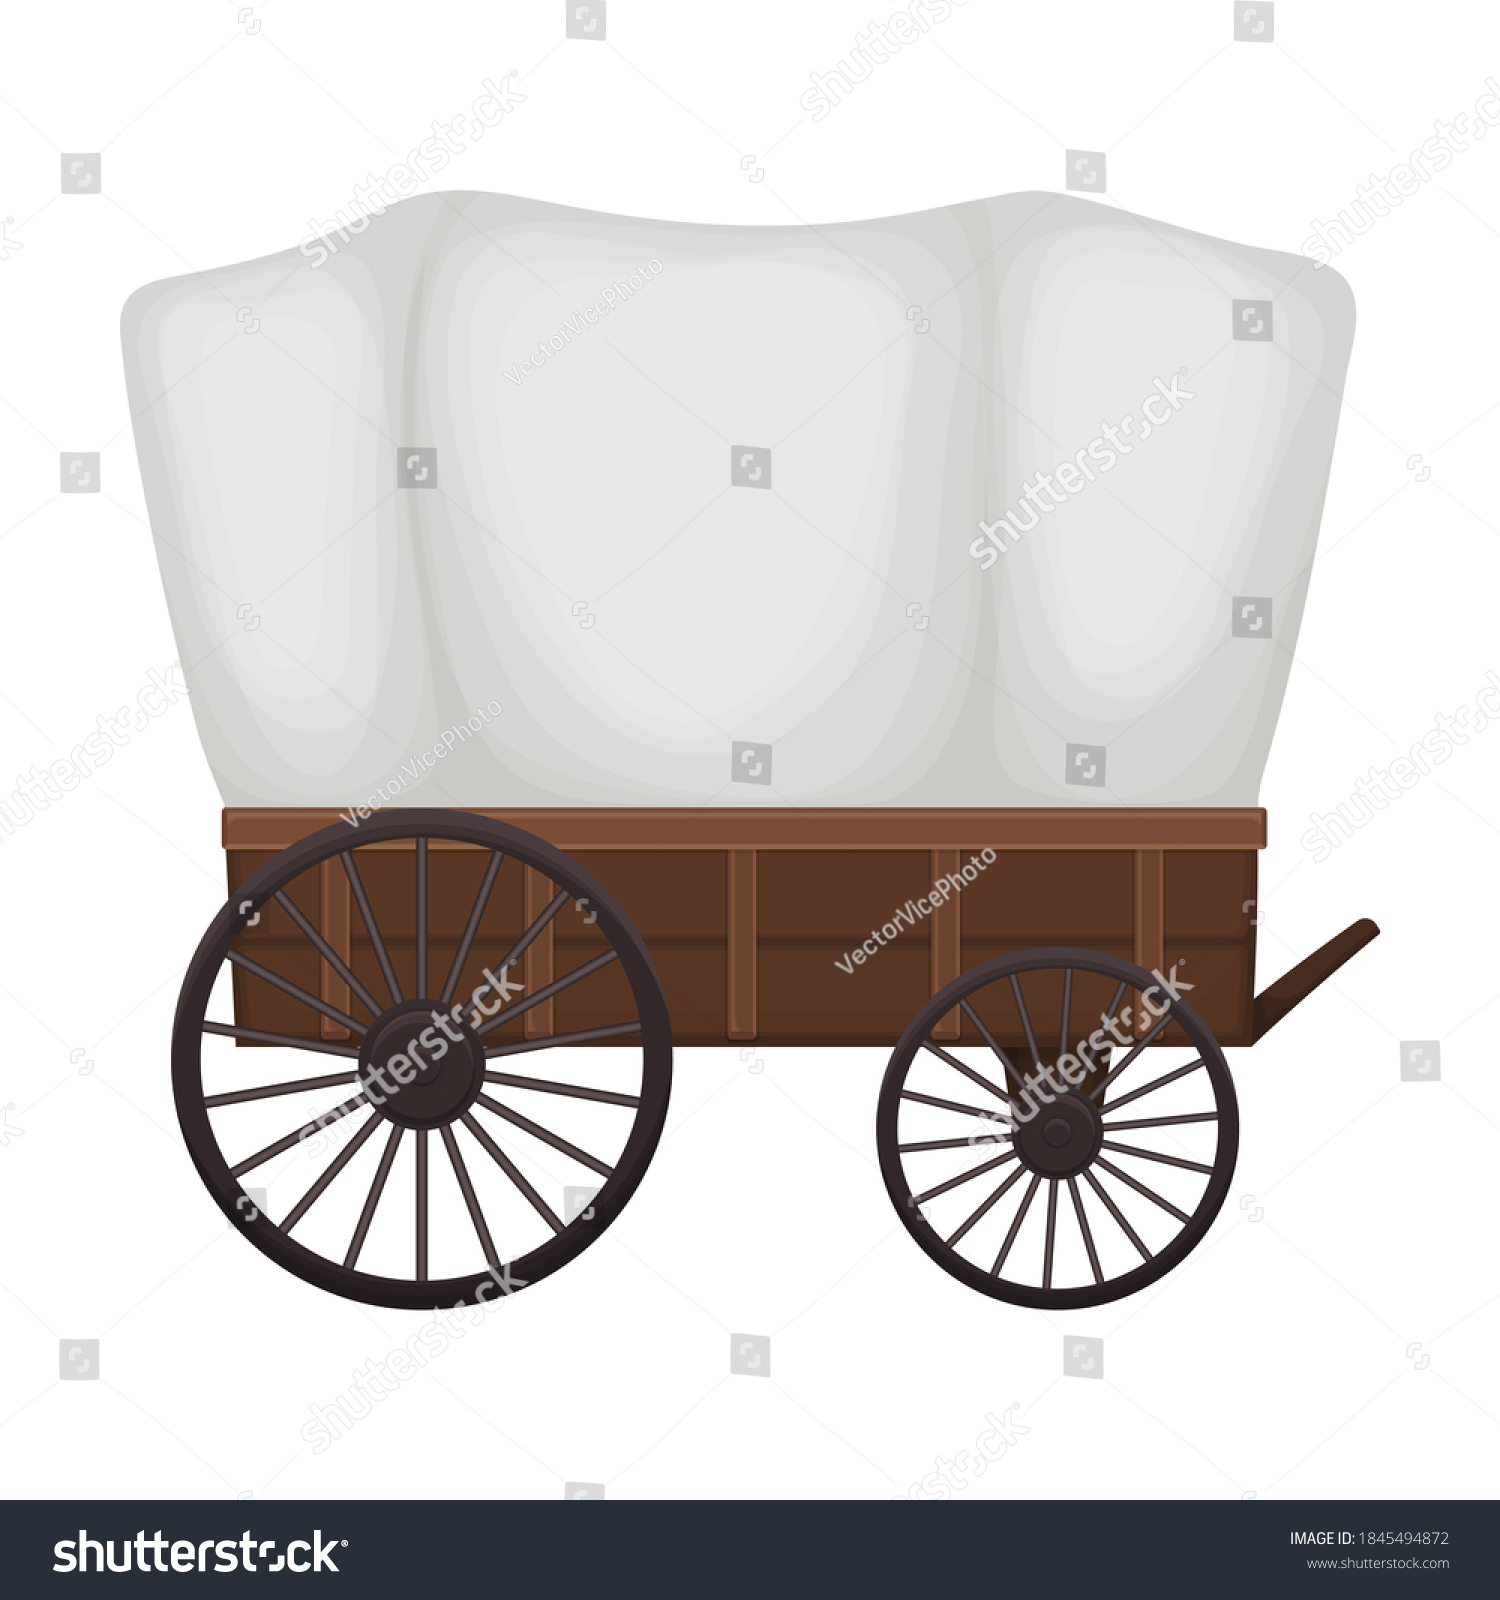 SVG of Wild west wagon cartoon vector icon.Cartoon vector illustration old carriage. Isolated illustration of wild west wagon icon on white background. svg